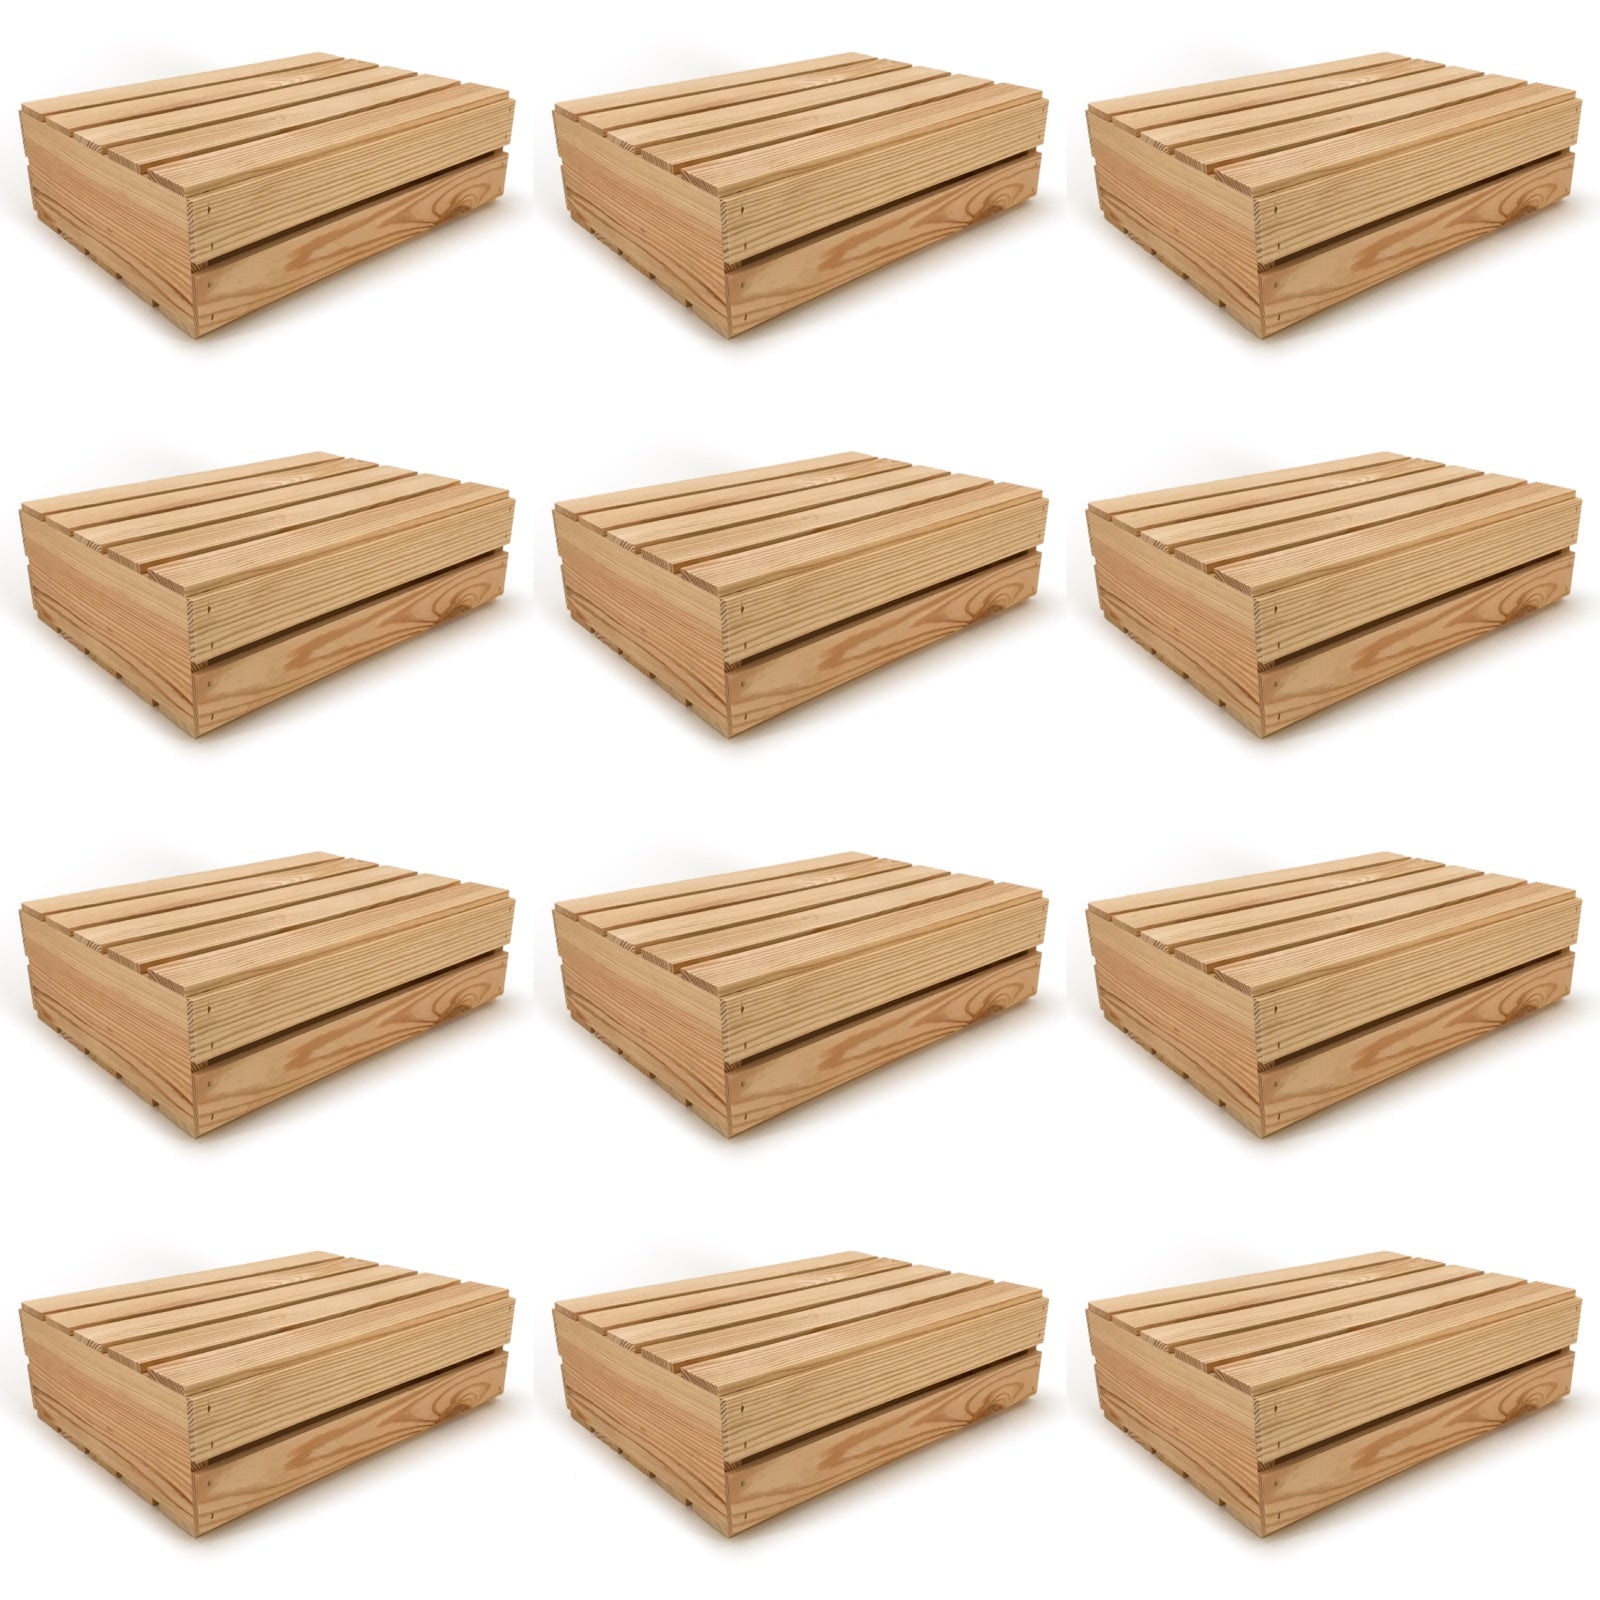 12 Small wooden crates with lid 18x14x5.25, 6-WS-18-14-5.25-NX-NW-LL, 12-WS-18-14-5.25-NX-NW-LL, 24-WS-18-14-5.25-NX-NW-LL, 48-WS-18-14-5.25-NX-NW-LL, 96-WS-18-14-5.25-NX-NW-LL